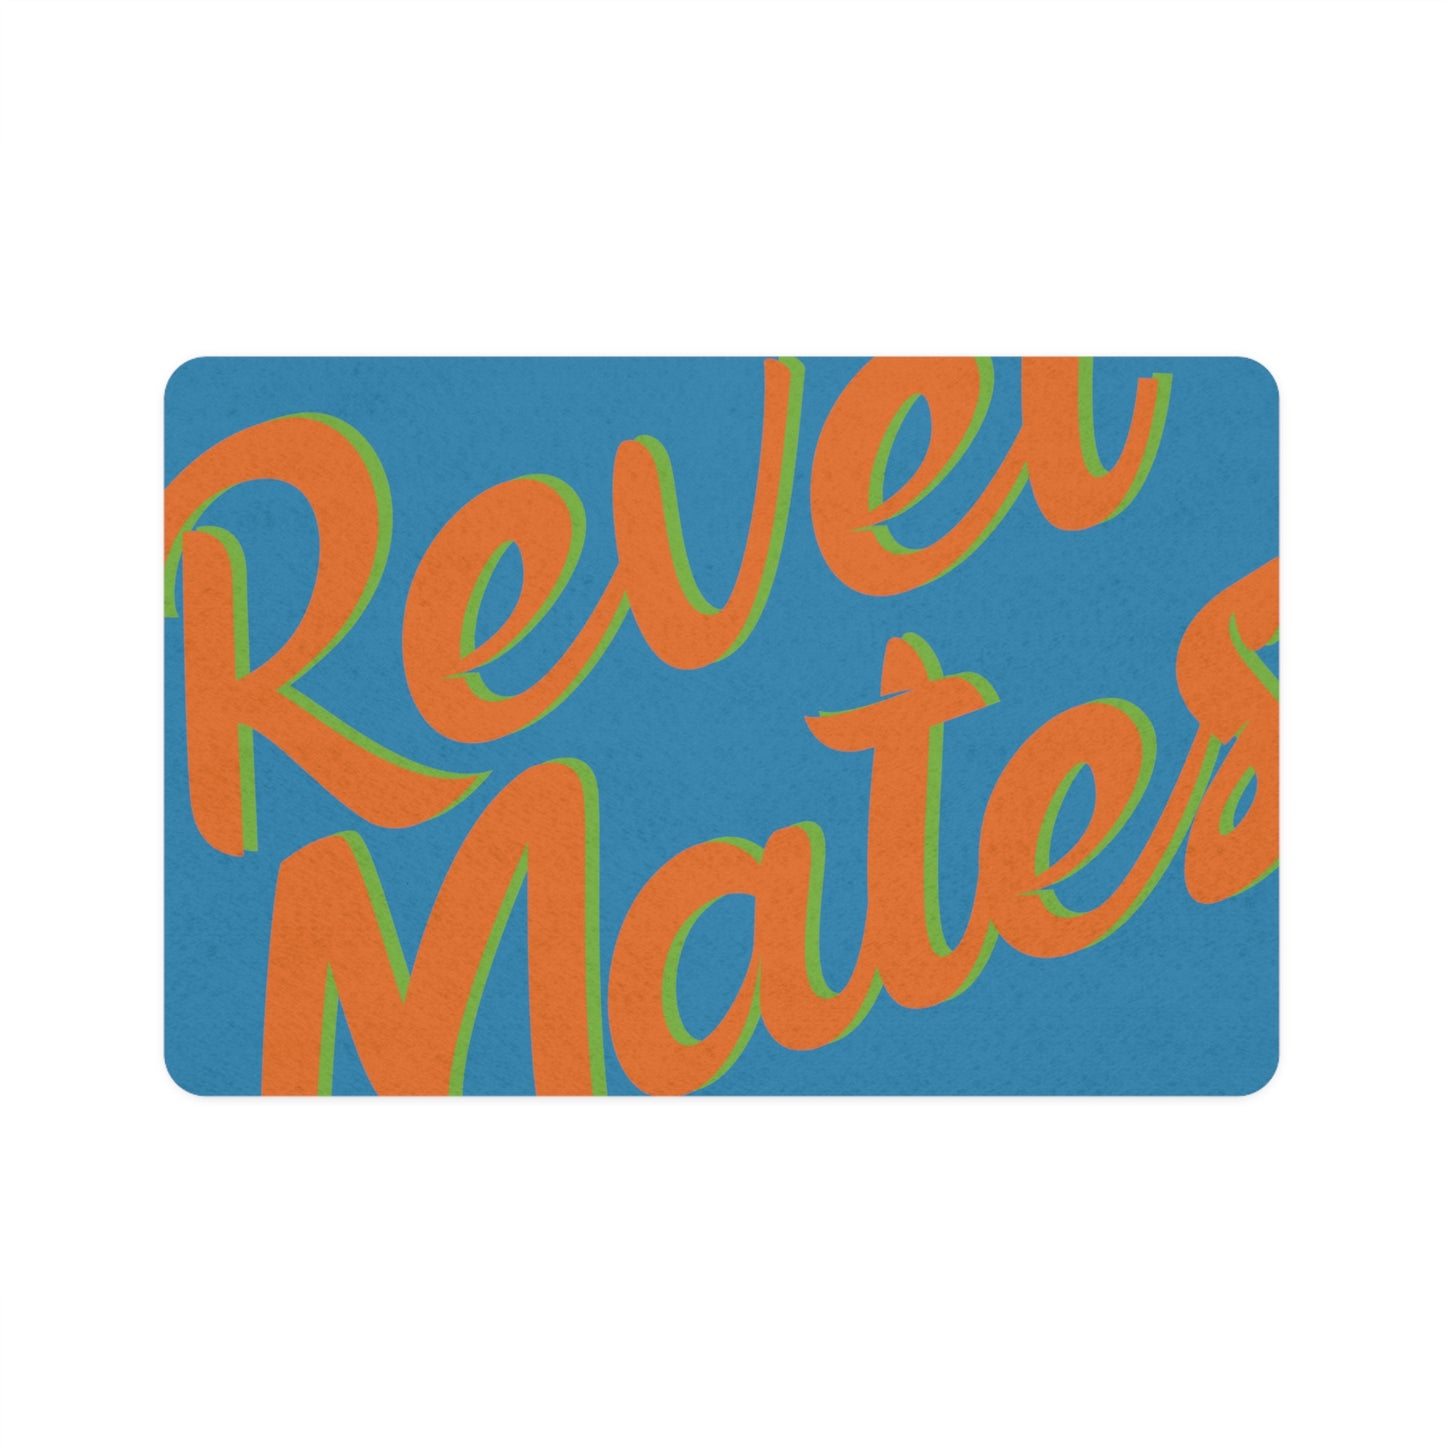 Pet Food Mat (12"x18") | for Dogs, Cats and all beloved Pets | Blue & Orange RevelMates Design